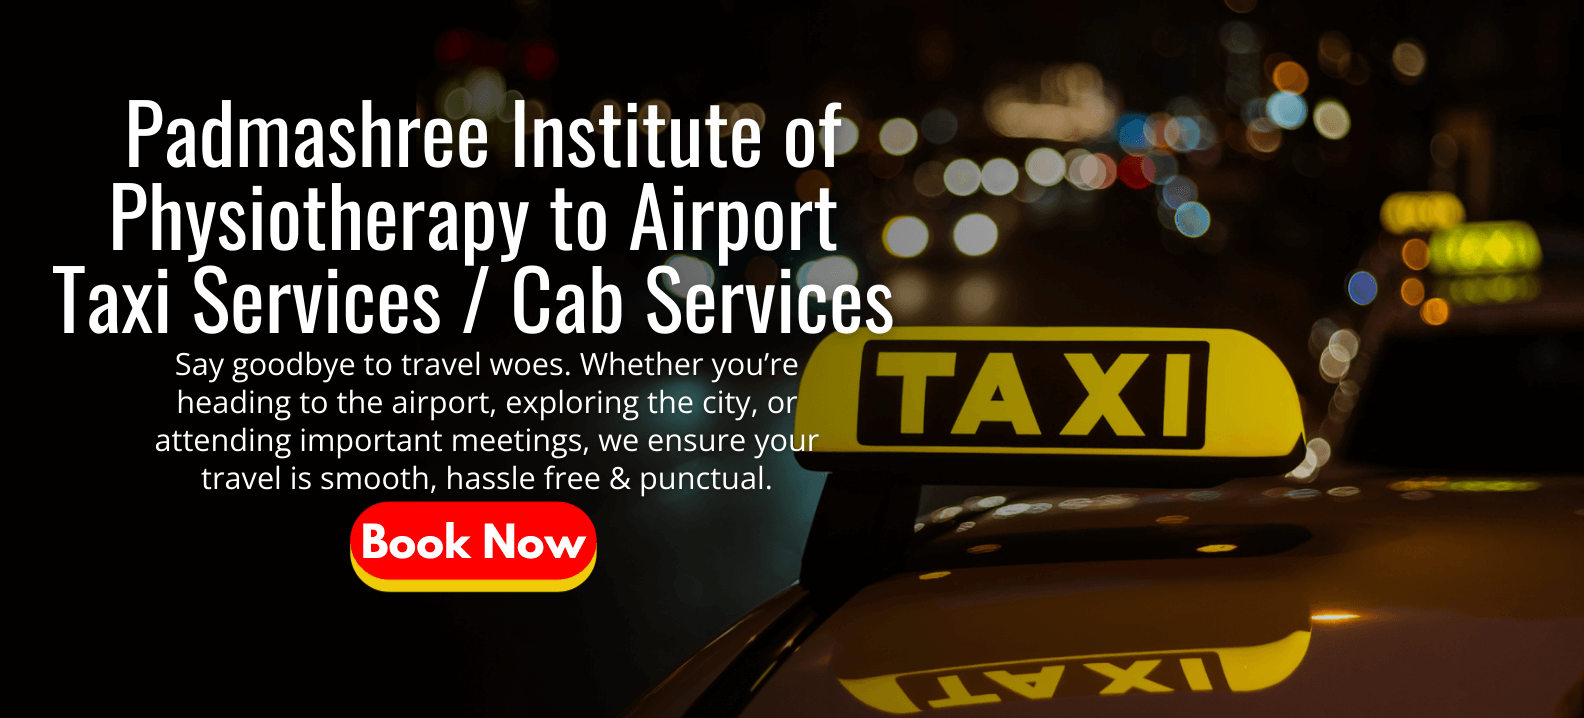 Padmashree Institute of Physiotherapy to Airport Taxi Services _ Cab Services